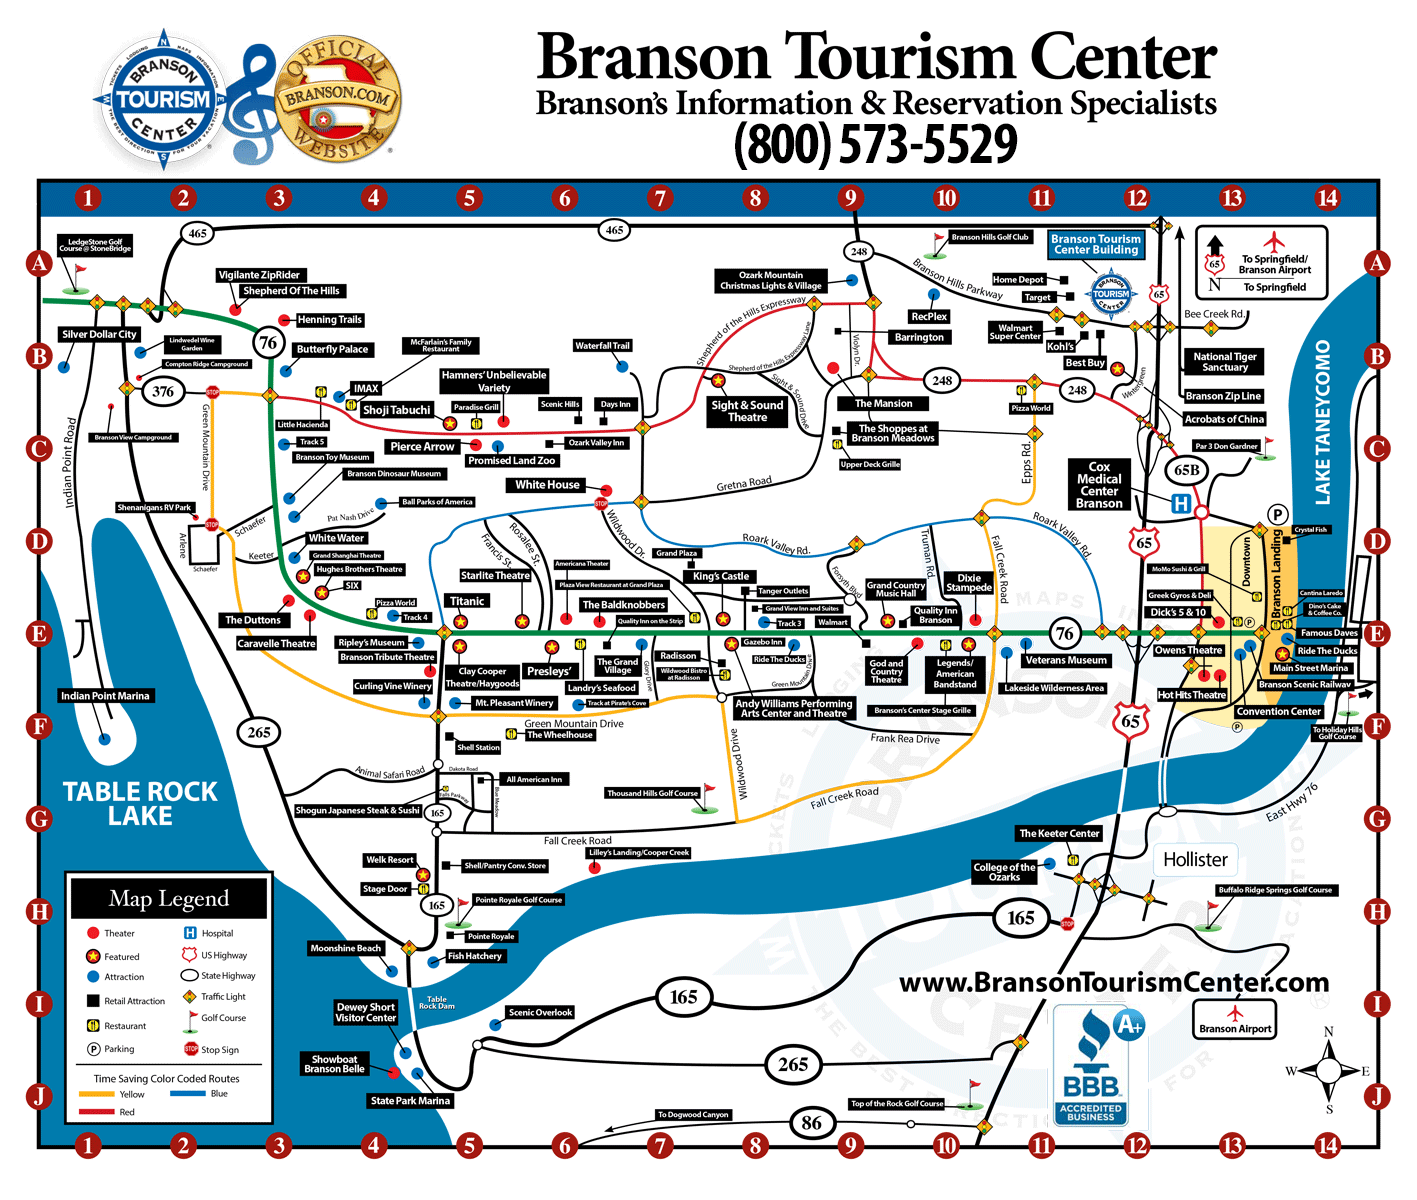 color-by-the-numbers-to-get-around-in-branson-like-a-pro-the-branson